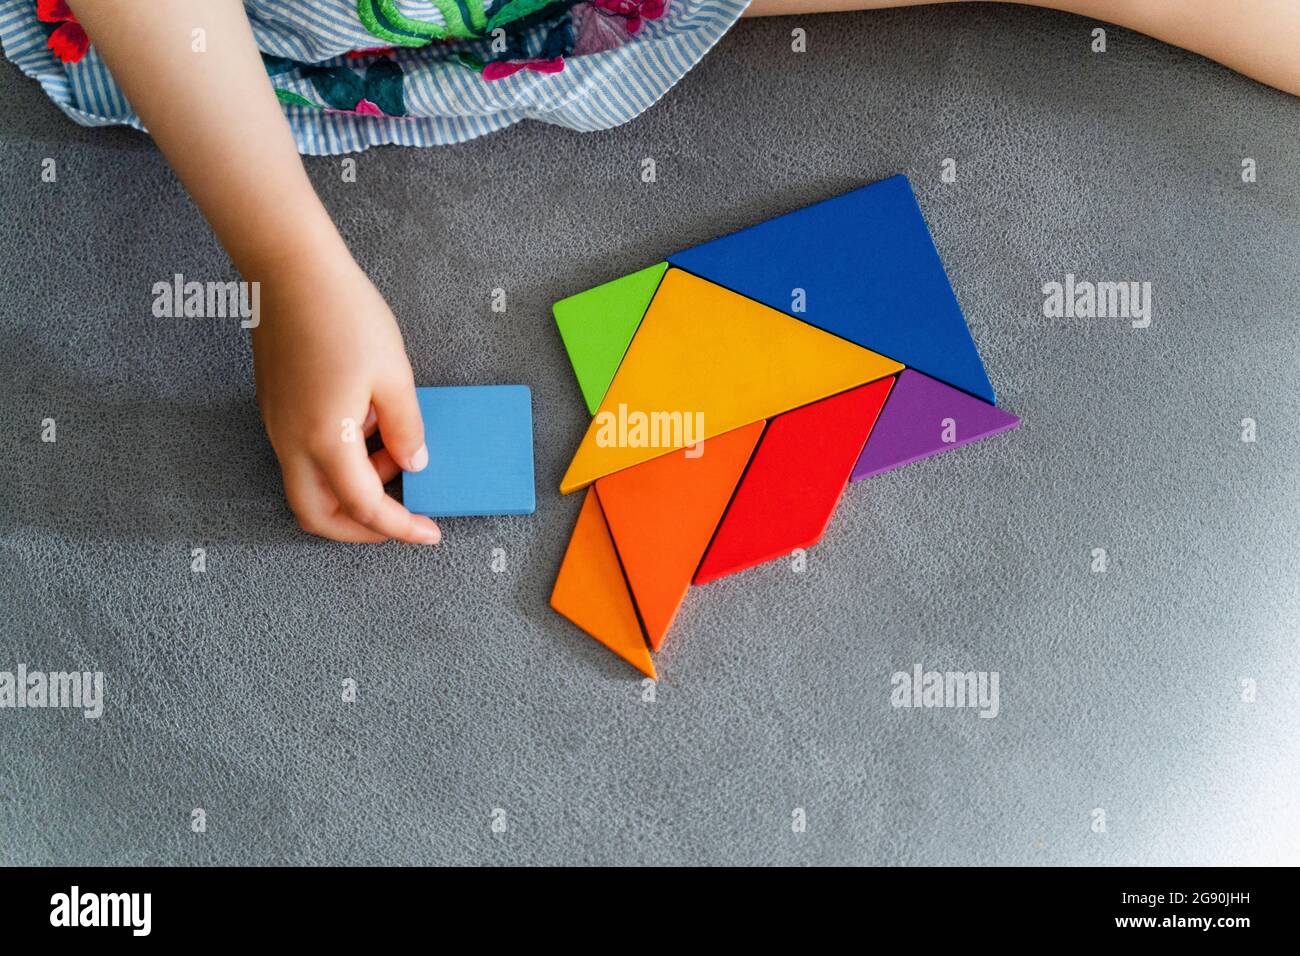 Woman playing with multi colored tangram on sofa Stock Photo